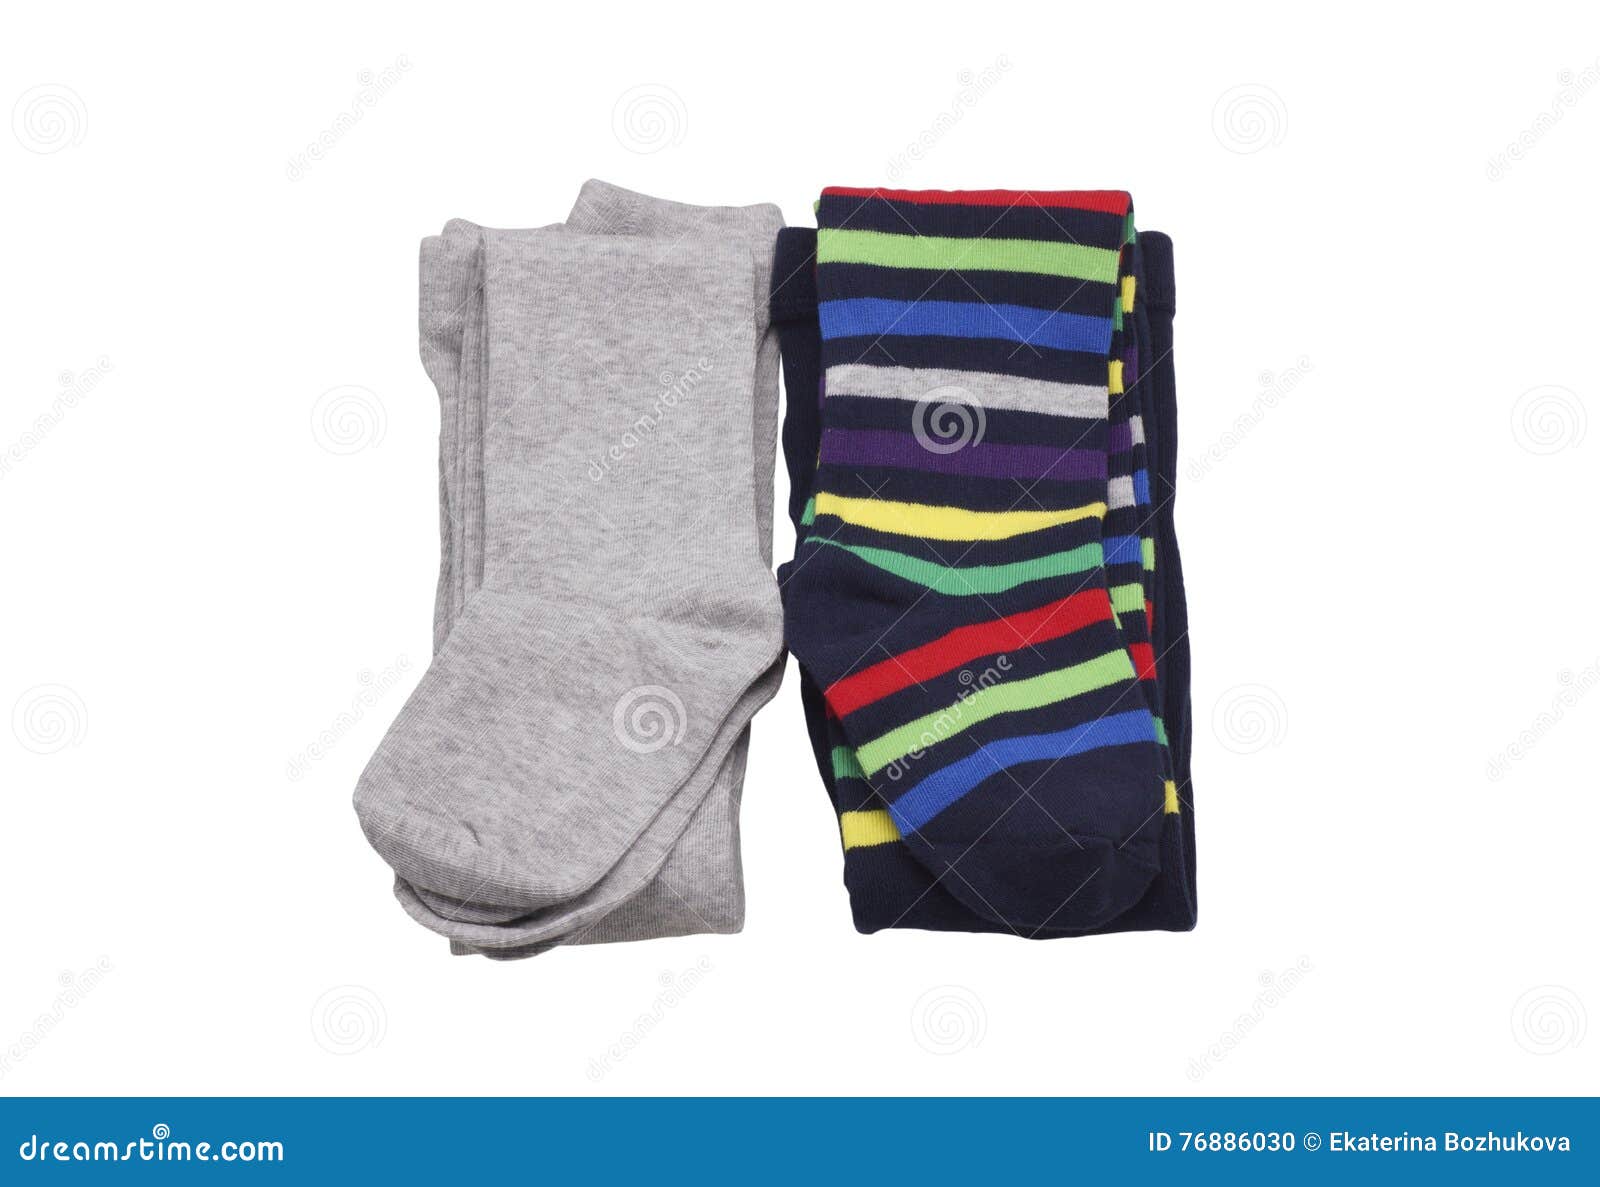 Children tights two. stock photo. Image of backgrounds - 76886030